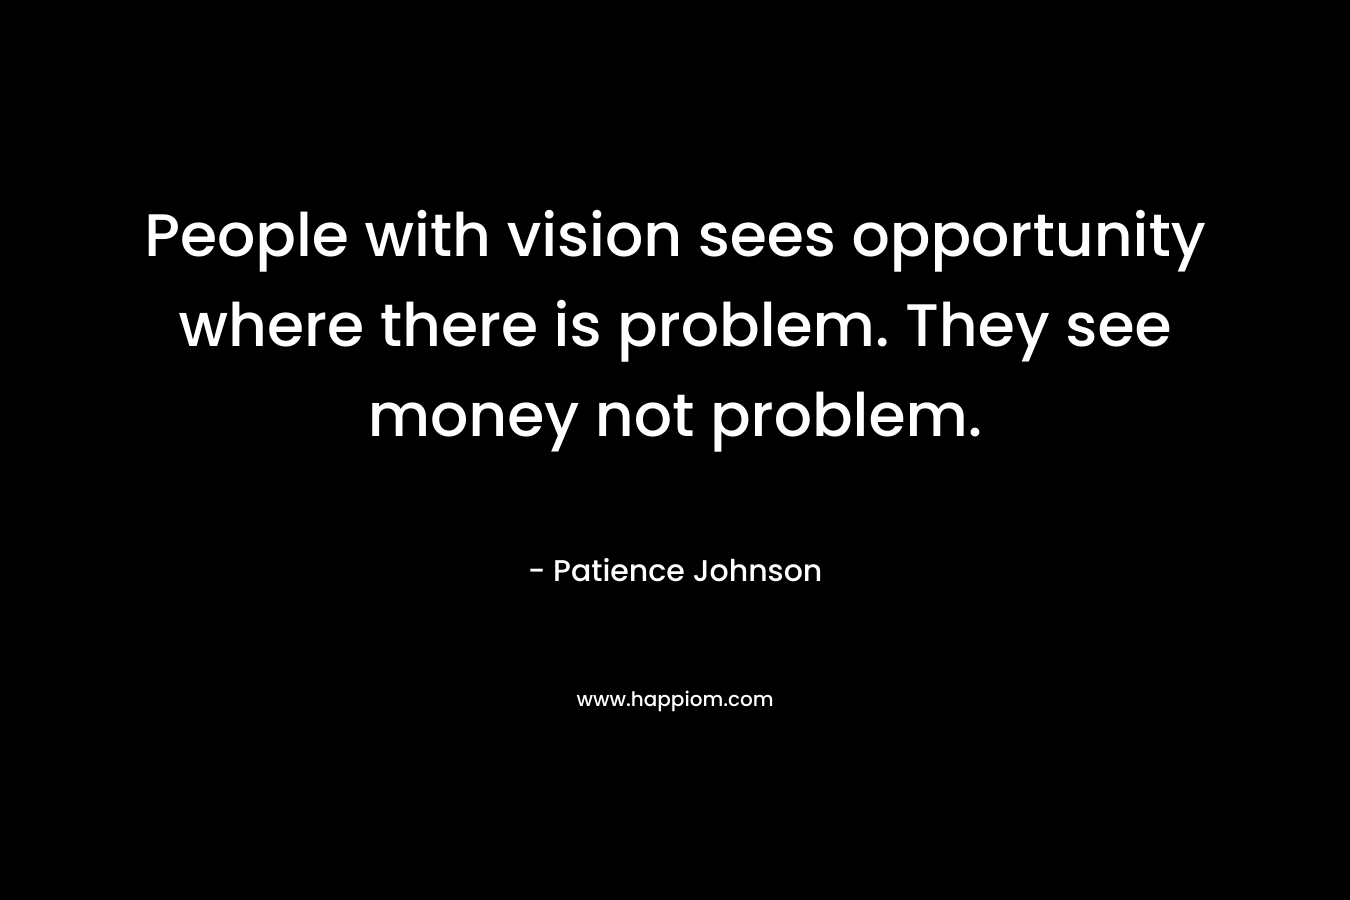 People with vision sees opportunity where there is problem. They see money not problem. – Patience Johnson